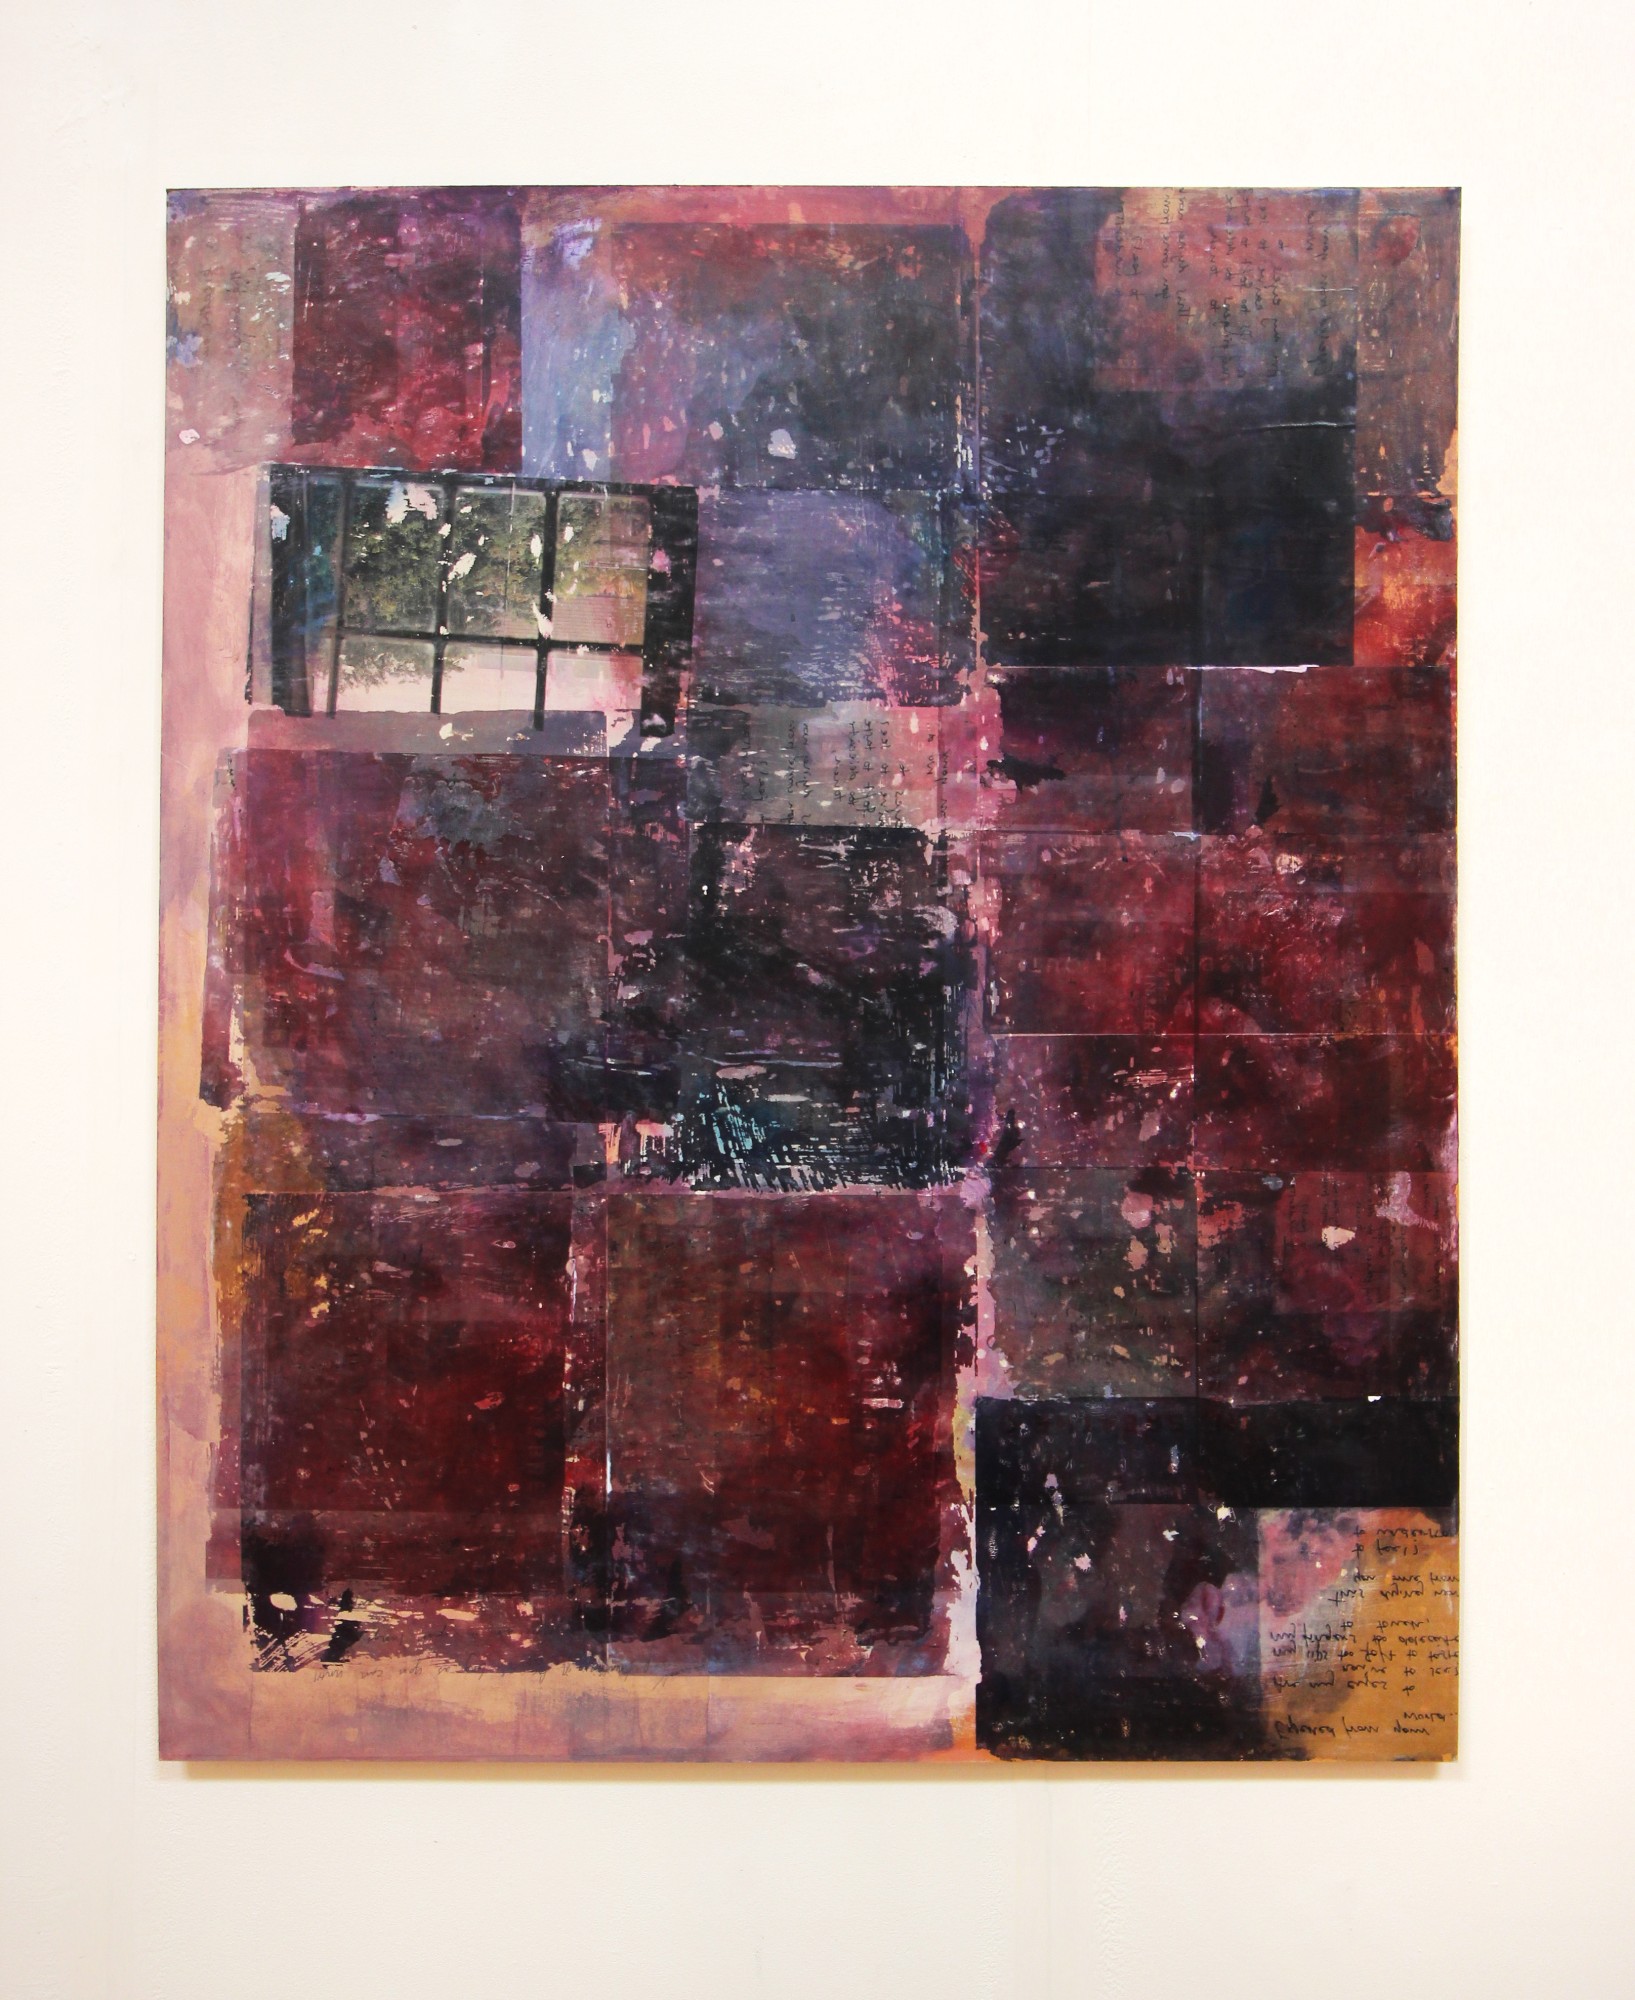 ‘Exit I’, 2021. Image transfer, and mixed media on wood panel. 100cm x 120cm.